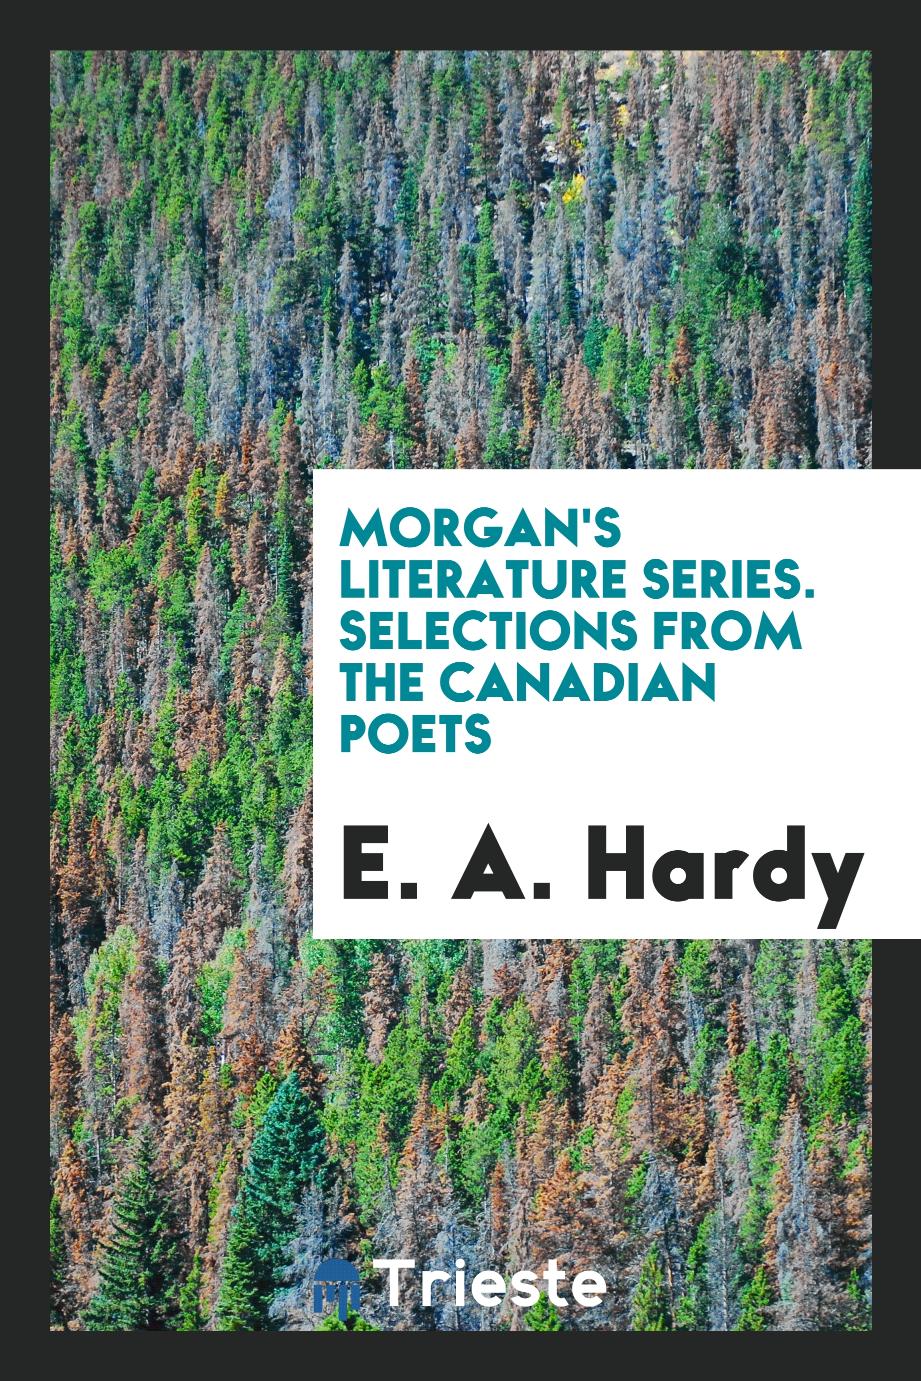 Morgan's Literature Series. Selections from the Canadian Poets